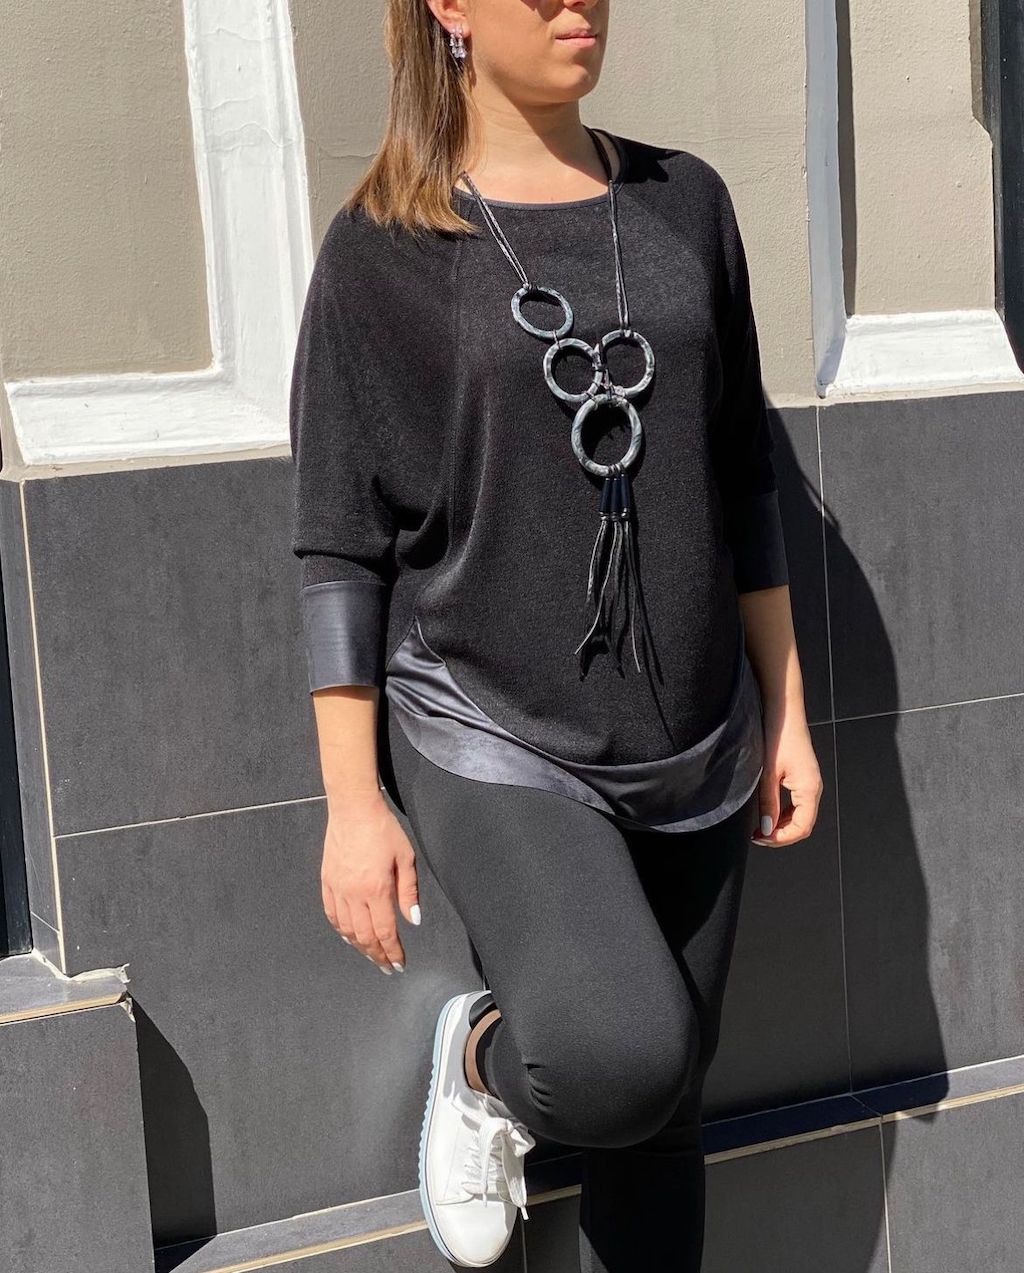 Black Blouse with Black Leggings Outfits (19 ideas & outfits)